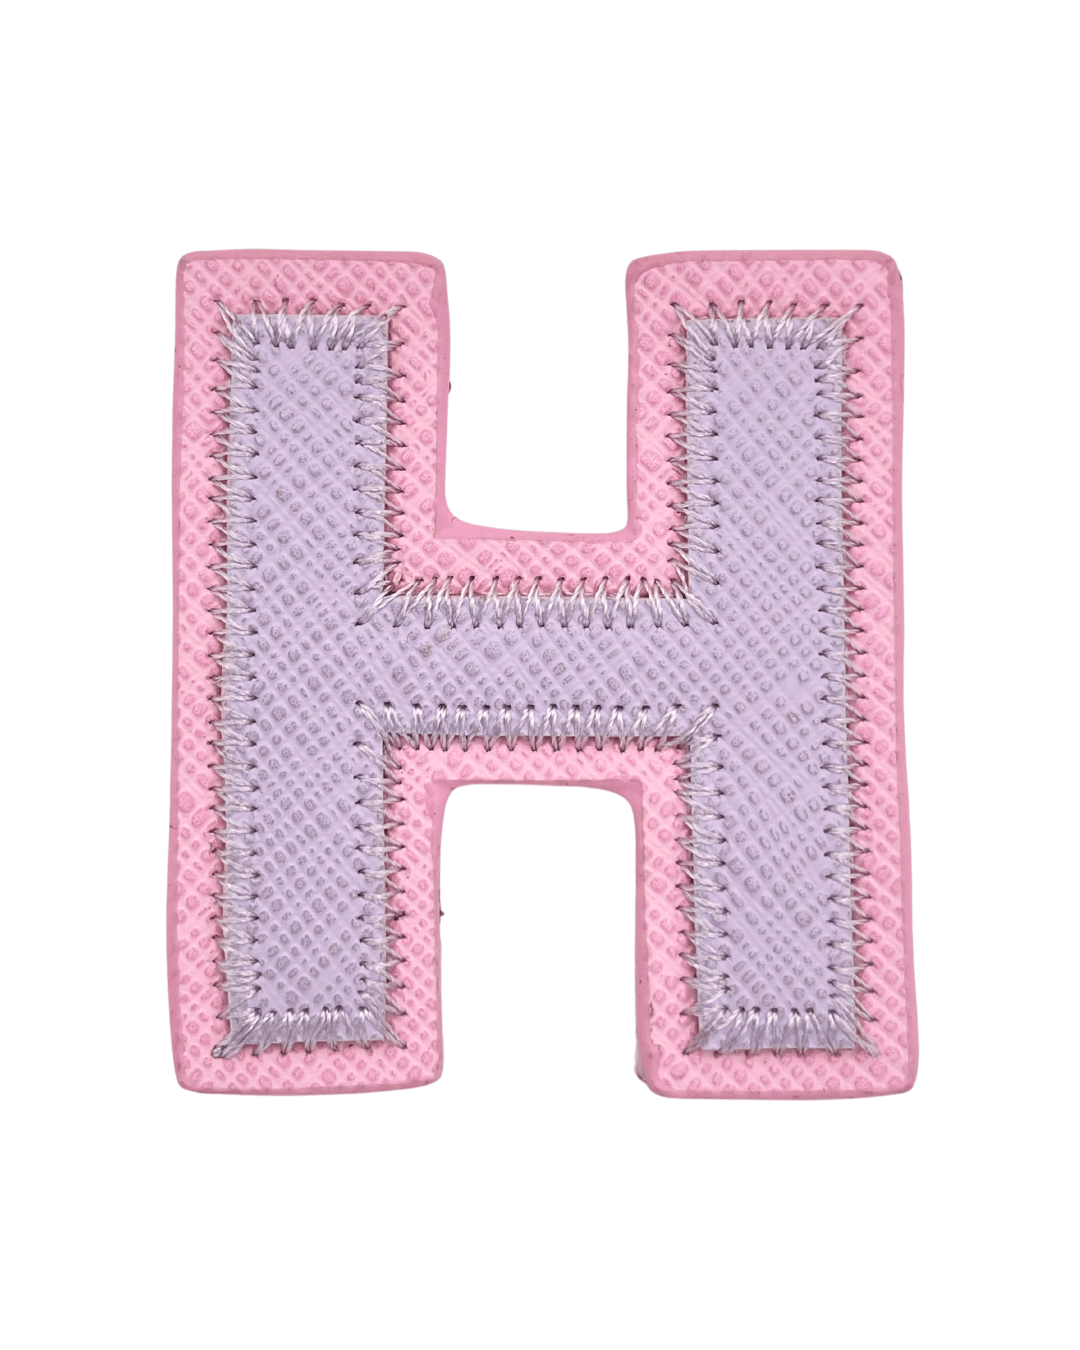 Purple + Pink Vegan Leather Letter Patches - American Deadstock